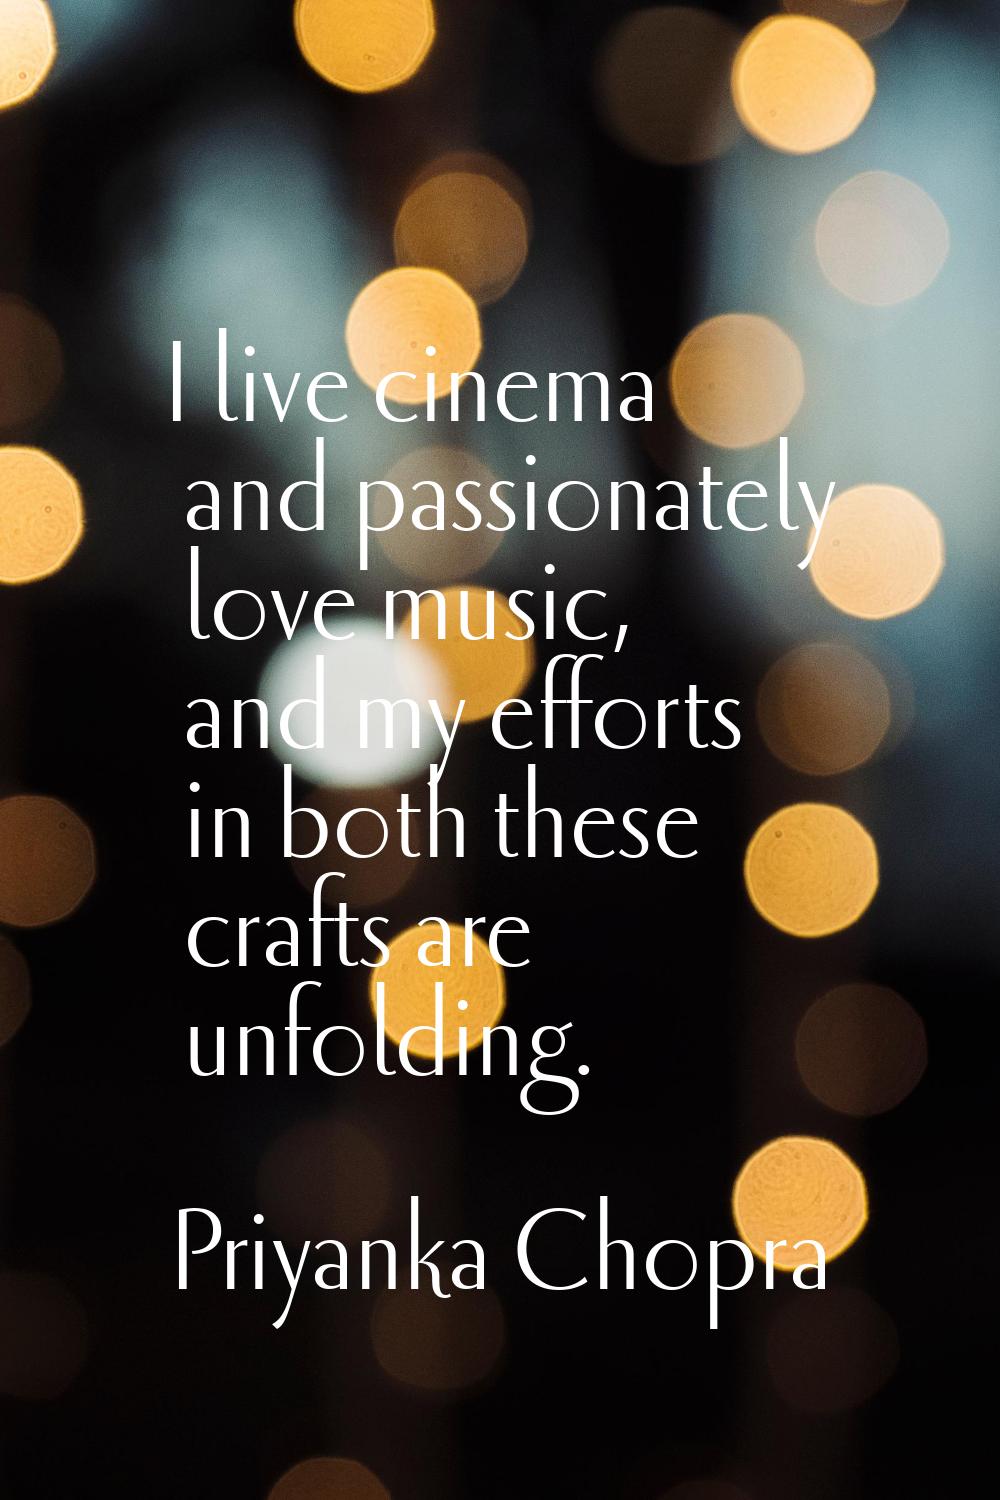 I live cinema and passionately love music, and my efforts in both these crafts are unfolding.